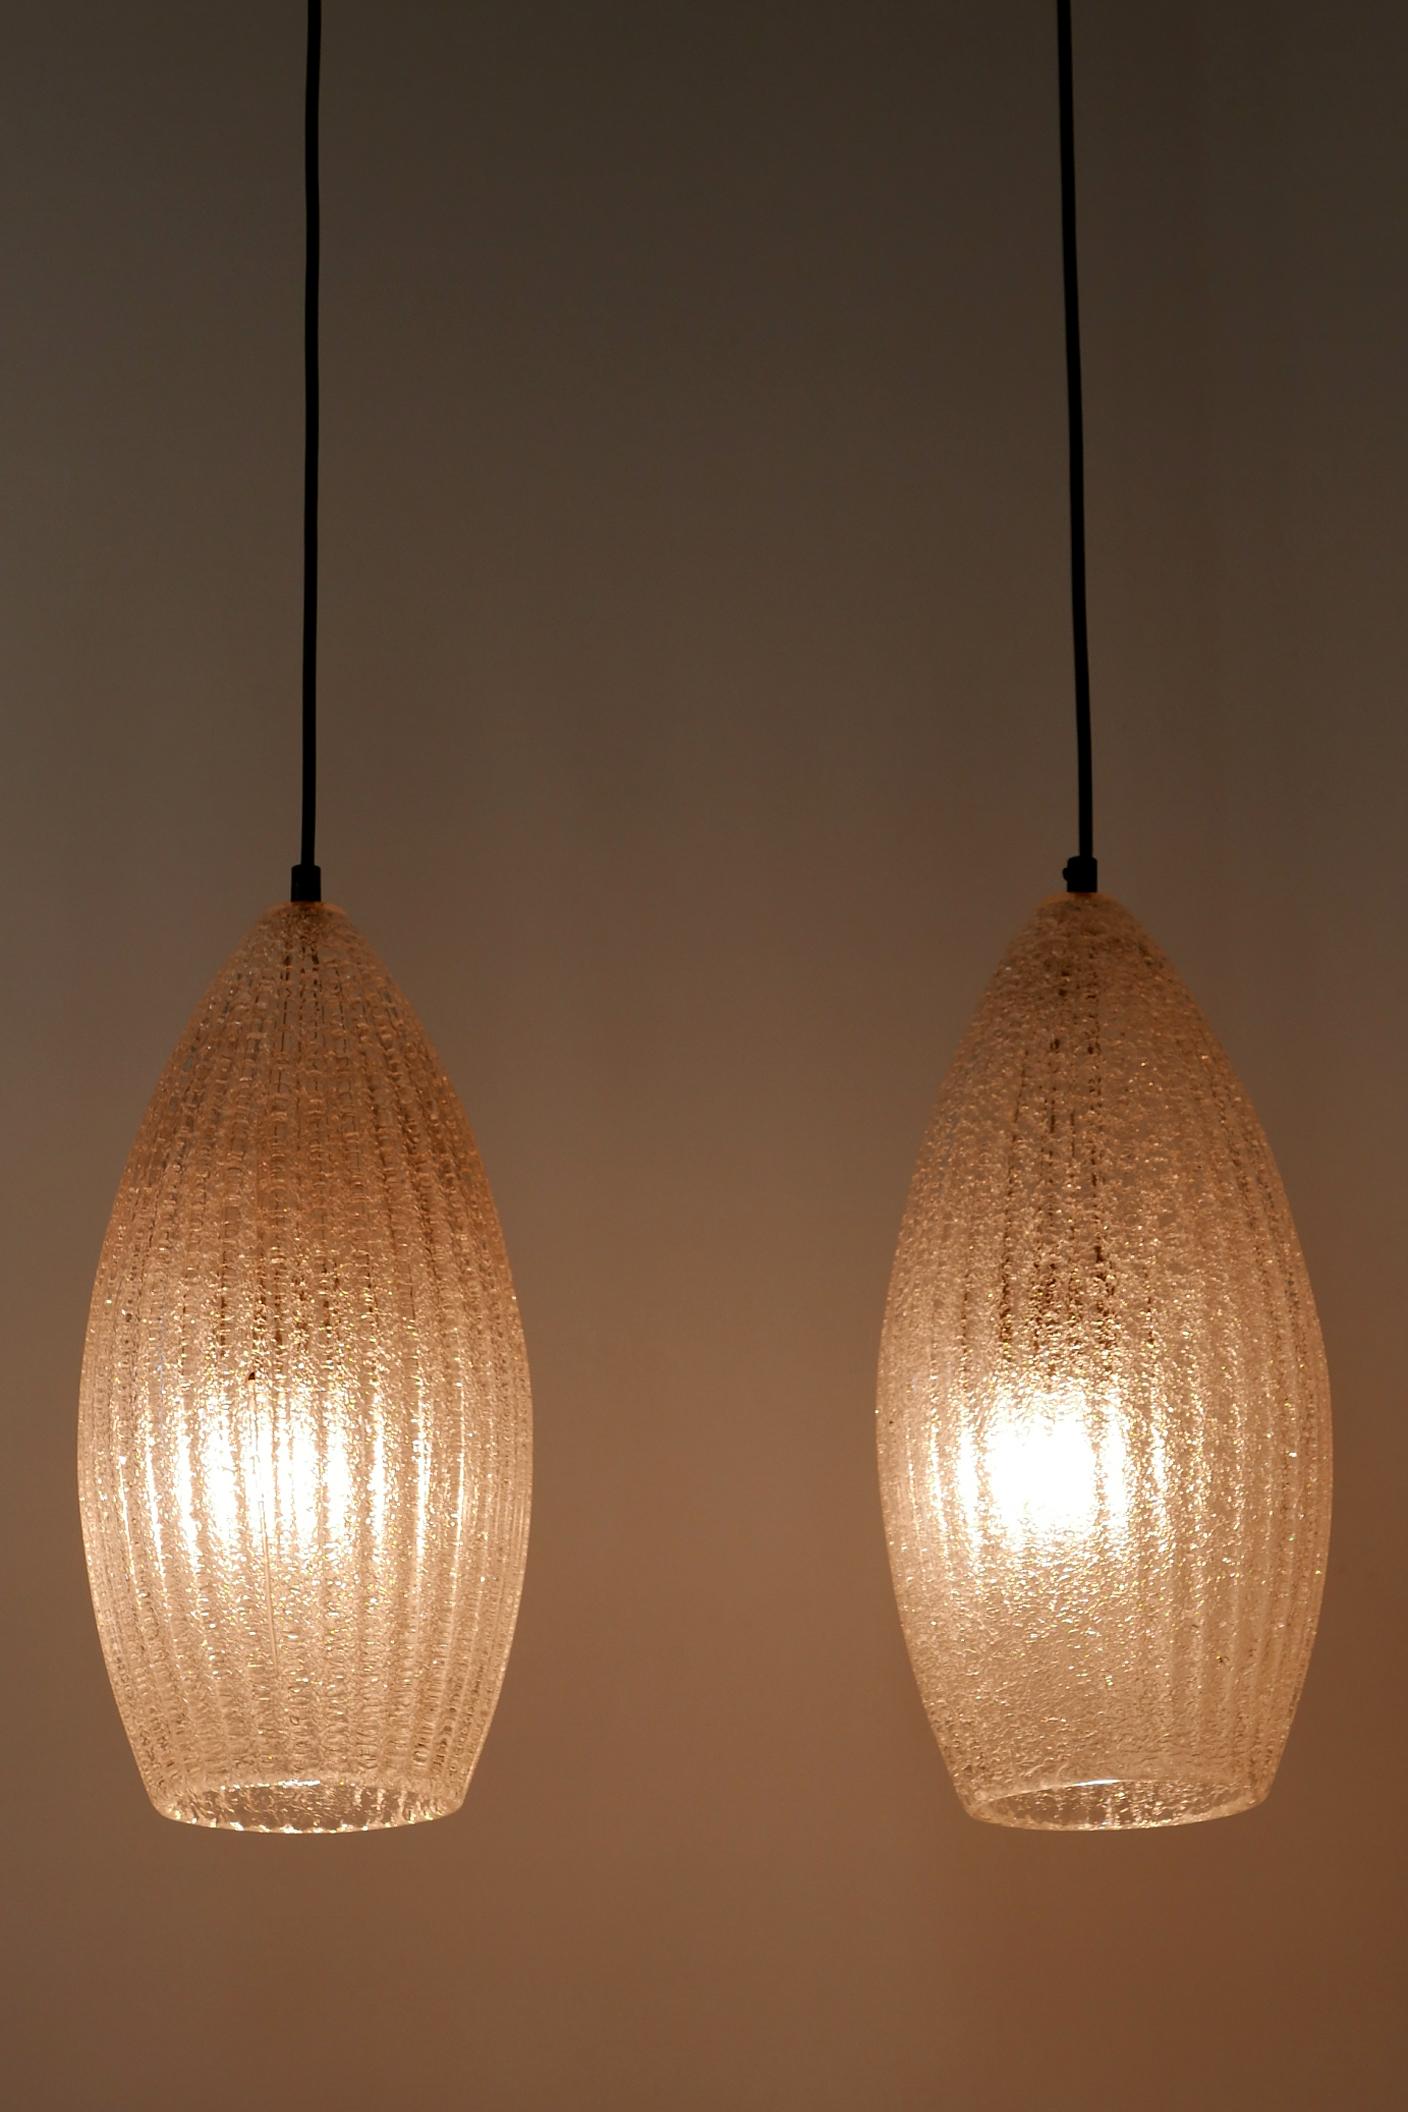 Set of Two Mid-Century Modern Textured Glass Pendant Lamps, 1960s, Germany For Sale 11